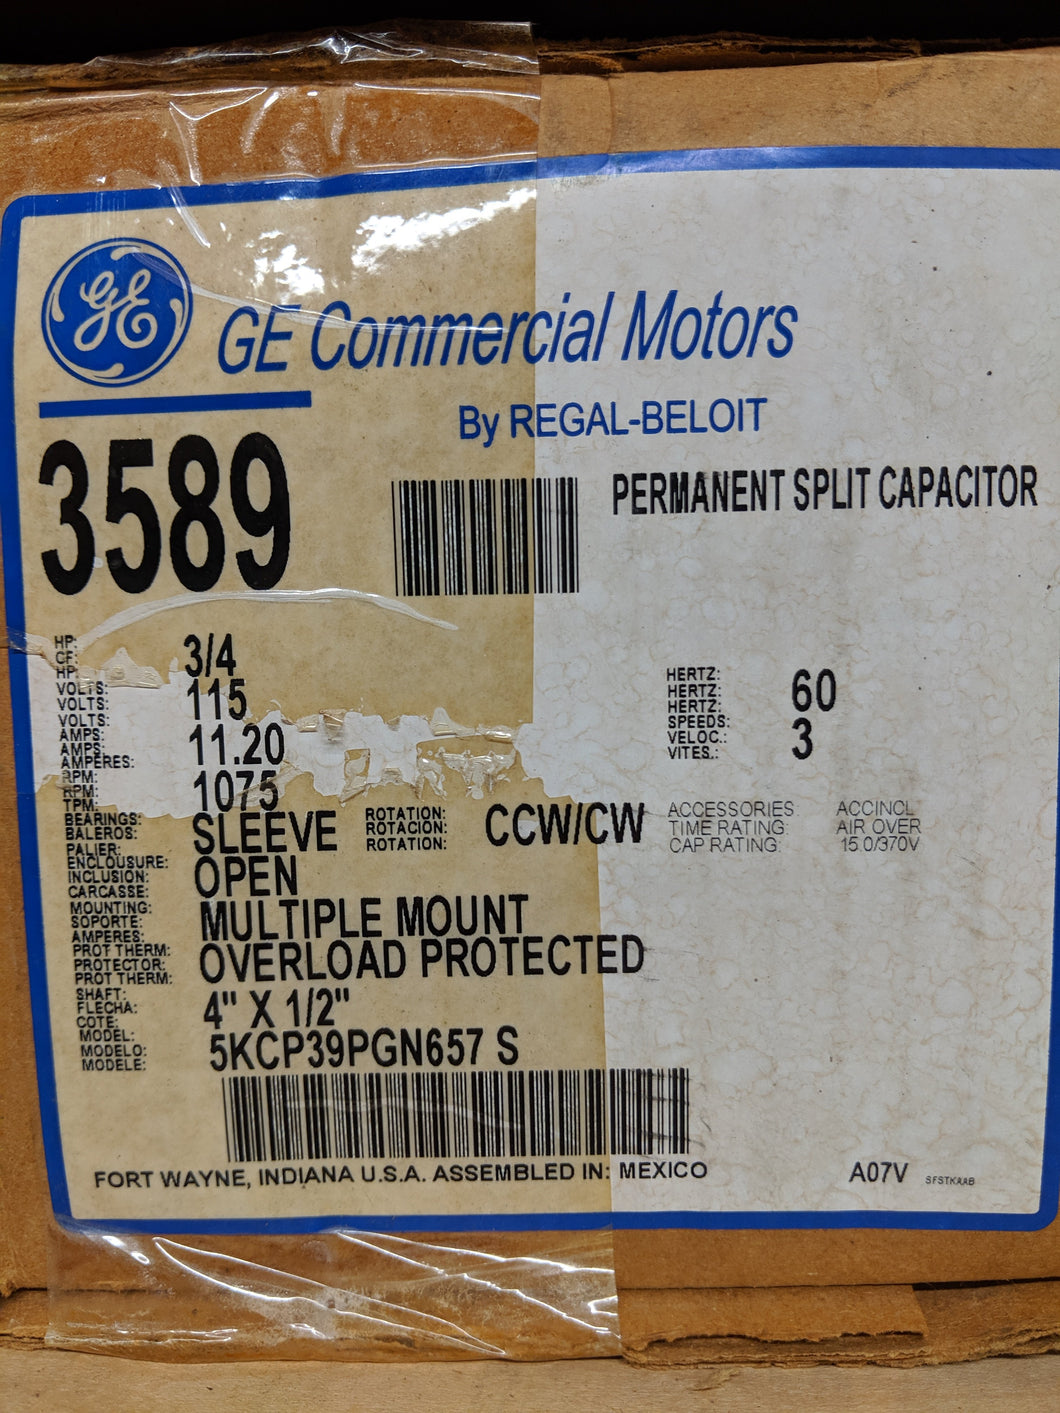 GE 3589, 3/4 HP, 115 Volts, 5KCP39PGN657S